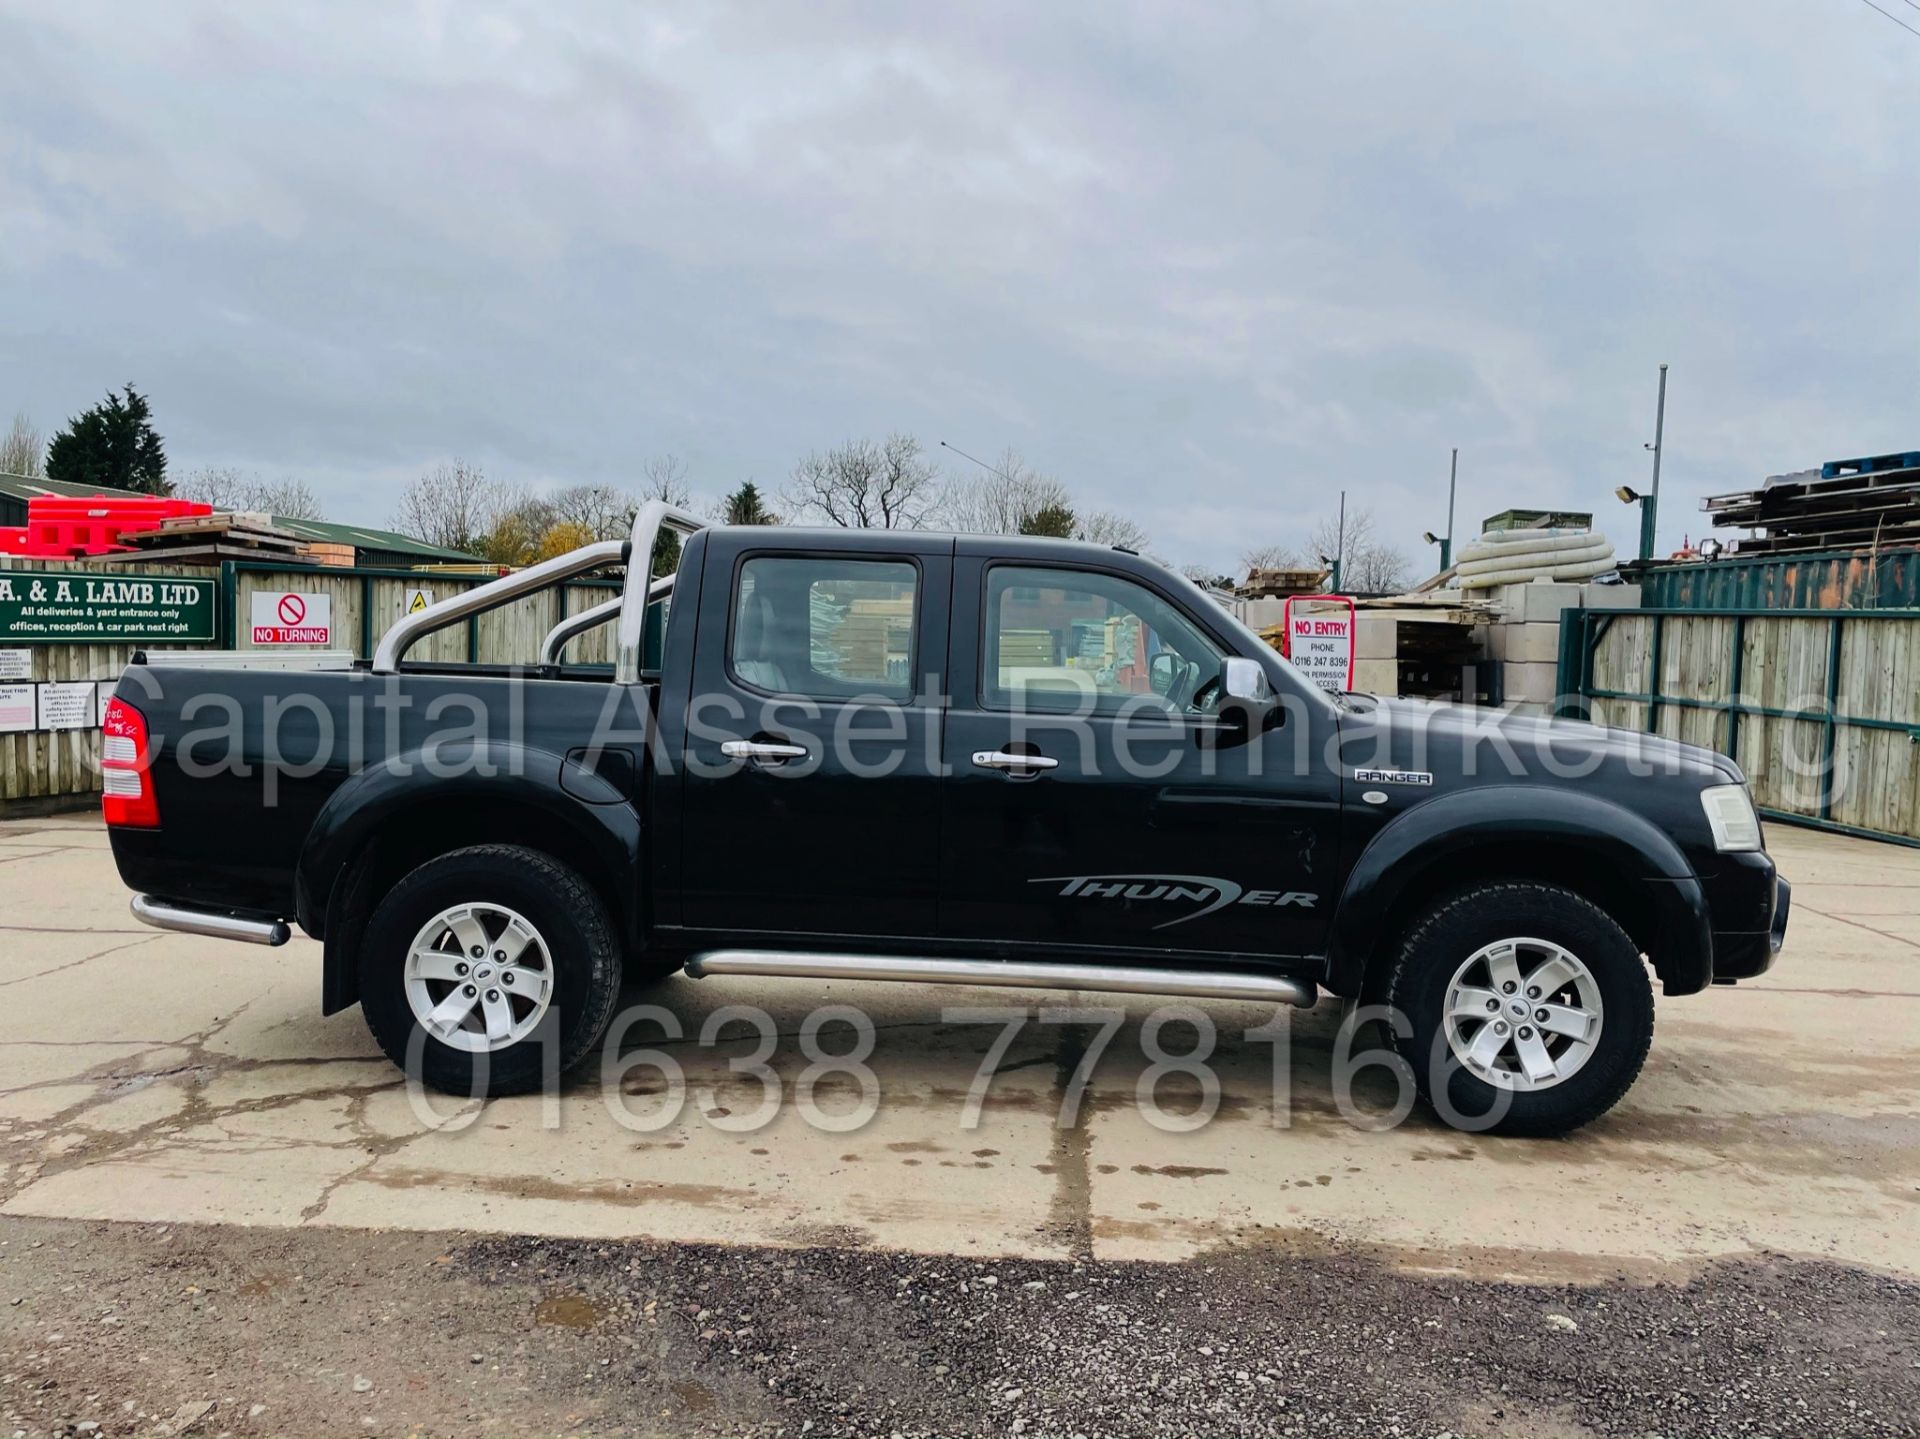 ON SALE FORD RANGER *THUNDER* DOUBLE CAB 4X4 PICK-UP (2009) '2.5 TDCI - 1 *LEATHER - A/C* (NO VAT) - Image 14 of 40